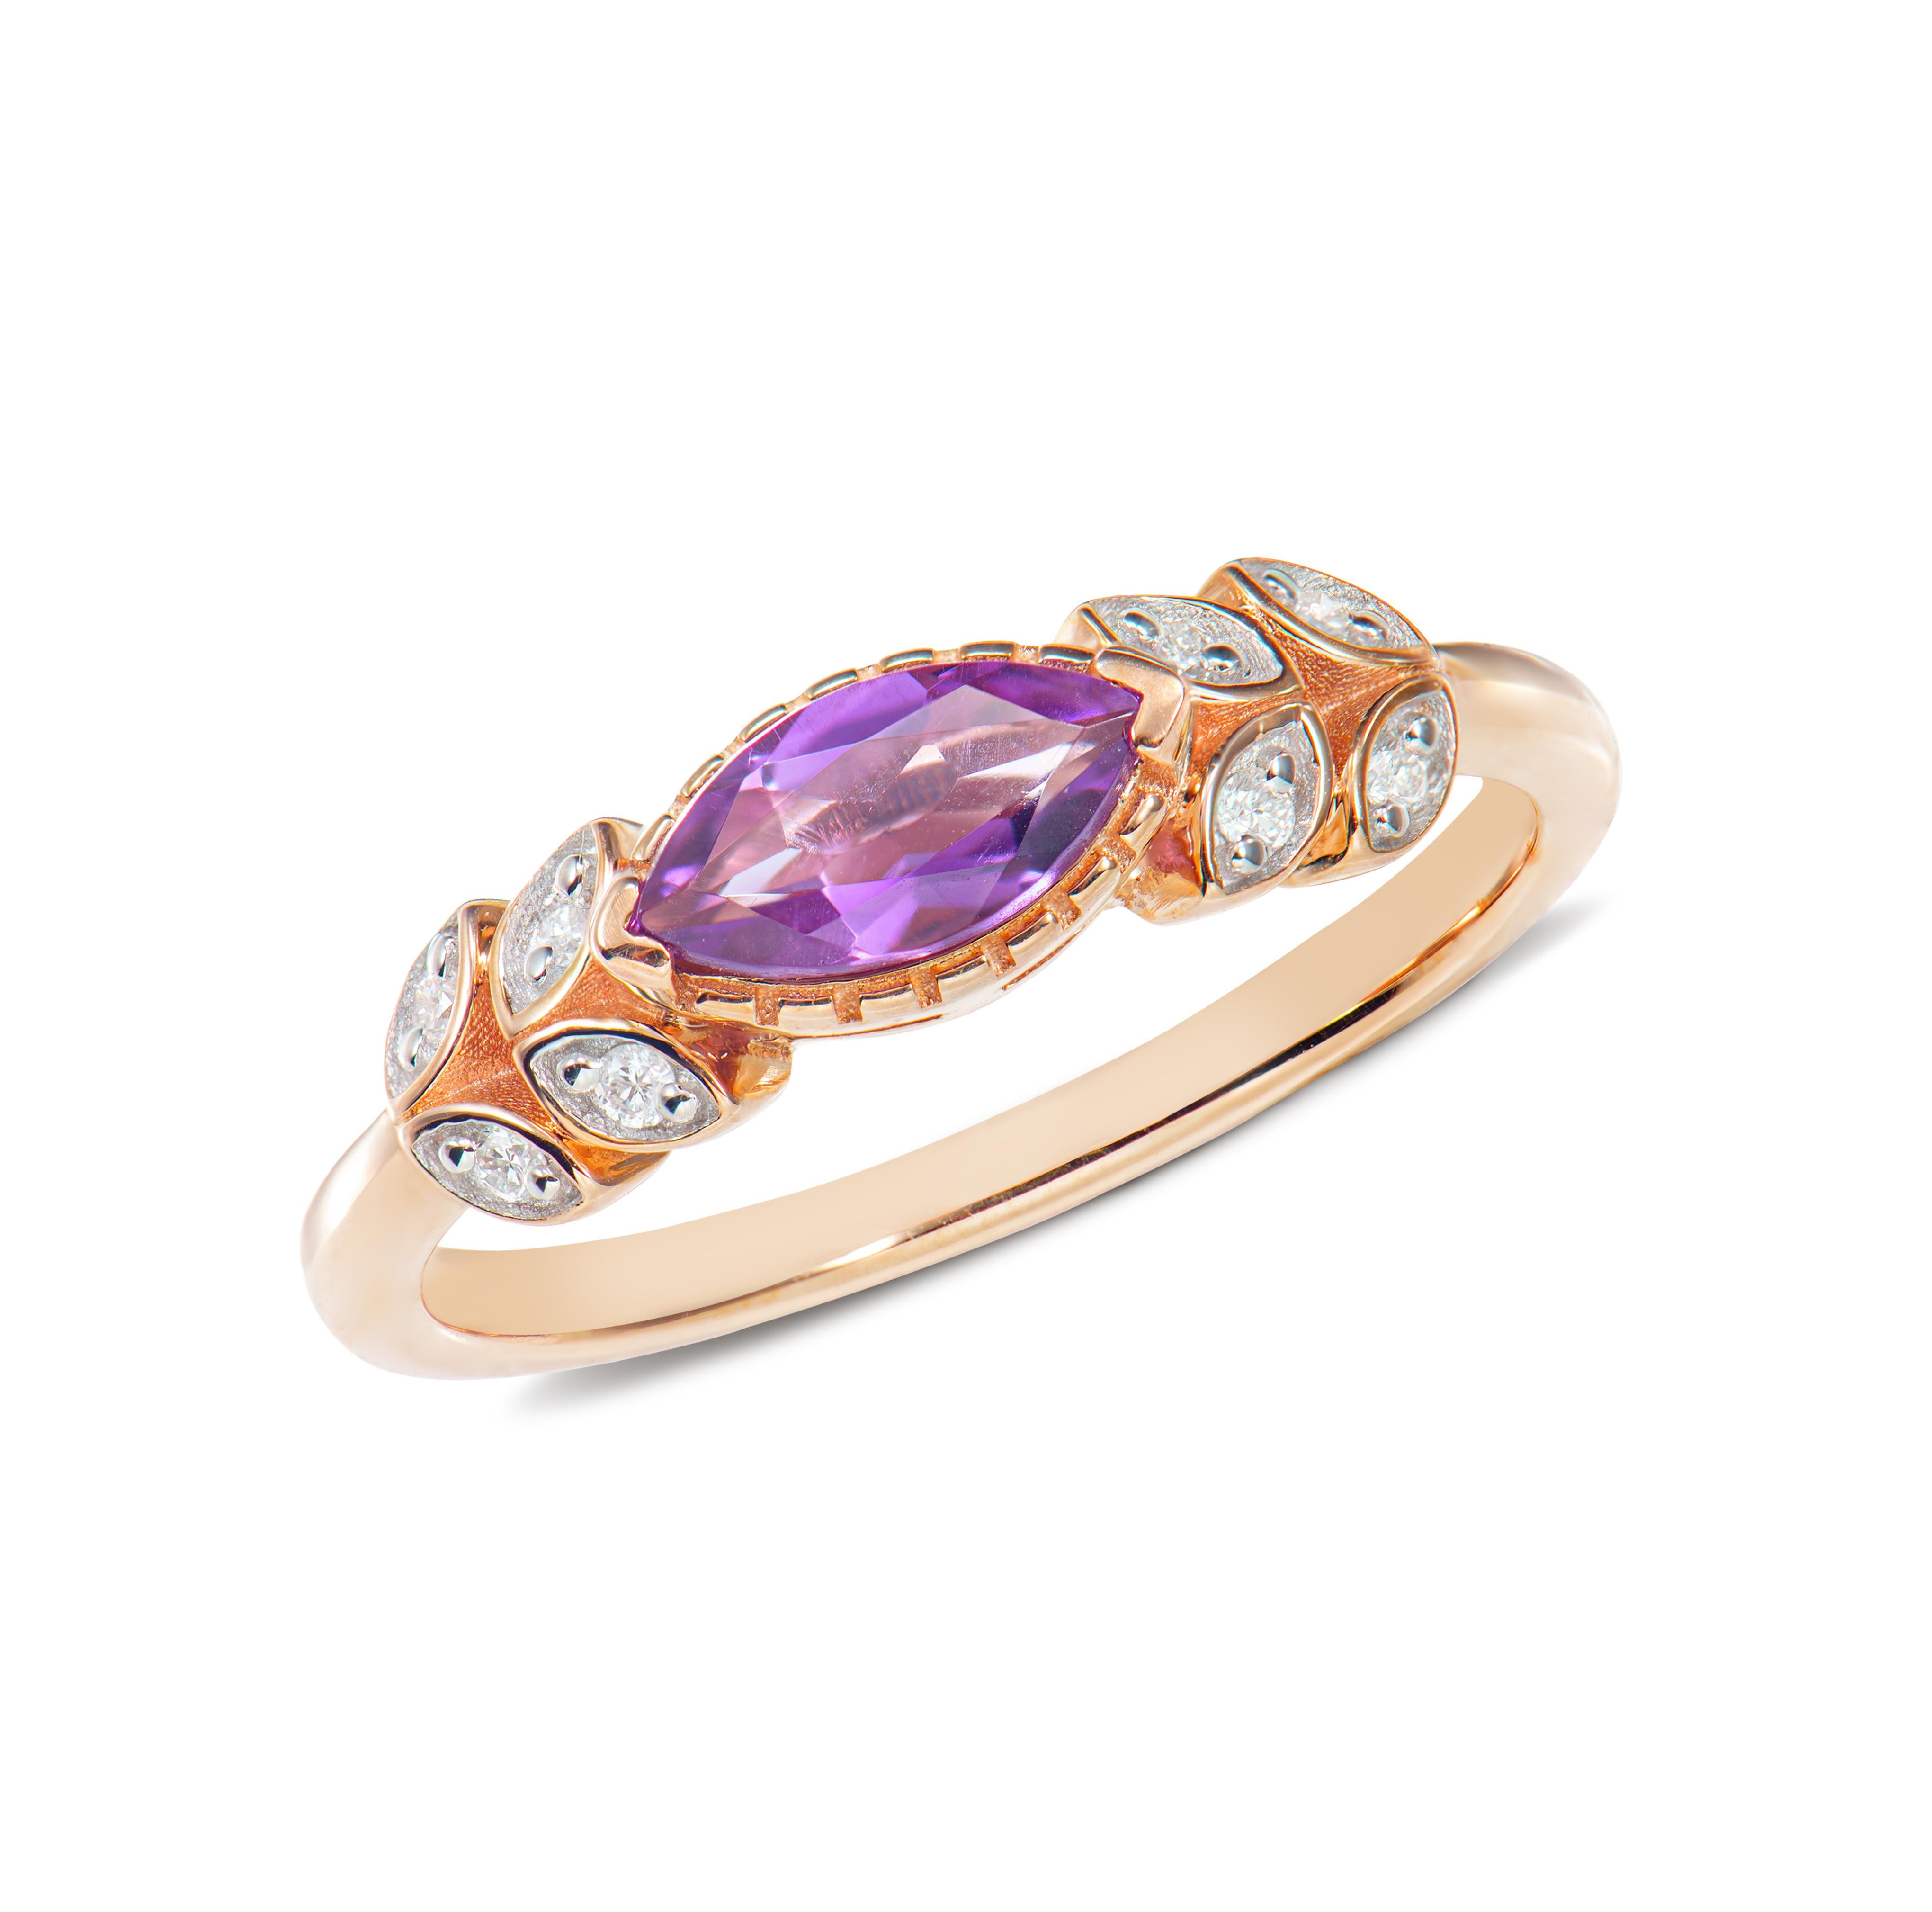 Presented A lovely set of Amethyst for people who value quality and want to wear it to any occasion or celebration. The rose gold Amethyst Fancy Ring adorned with diamonds offer a classic yet elegant appearance.
  
Amethyst Fancy Ring in 14Karat